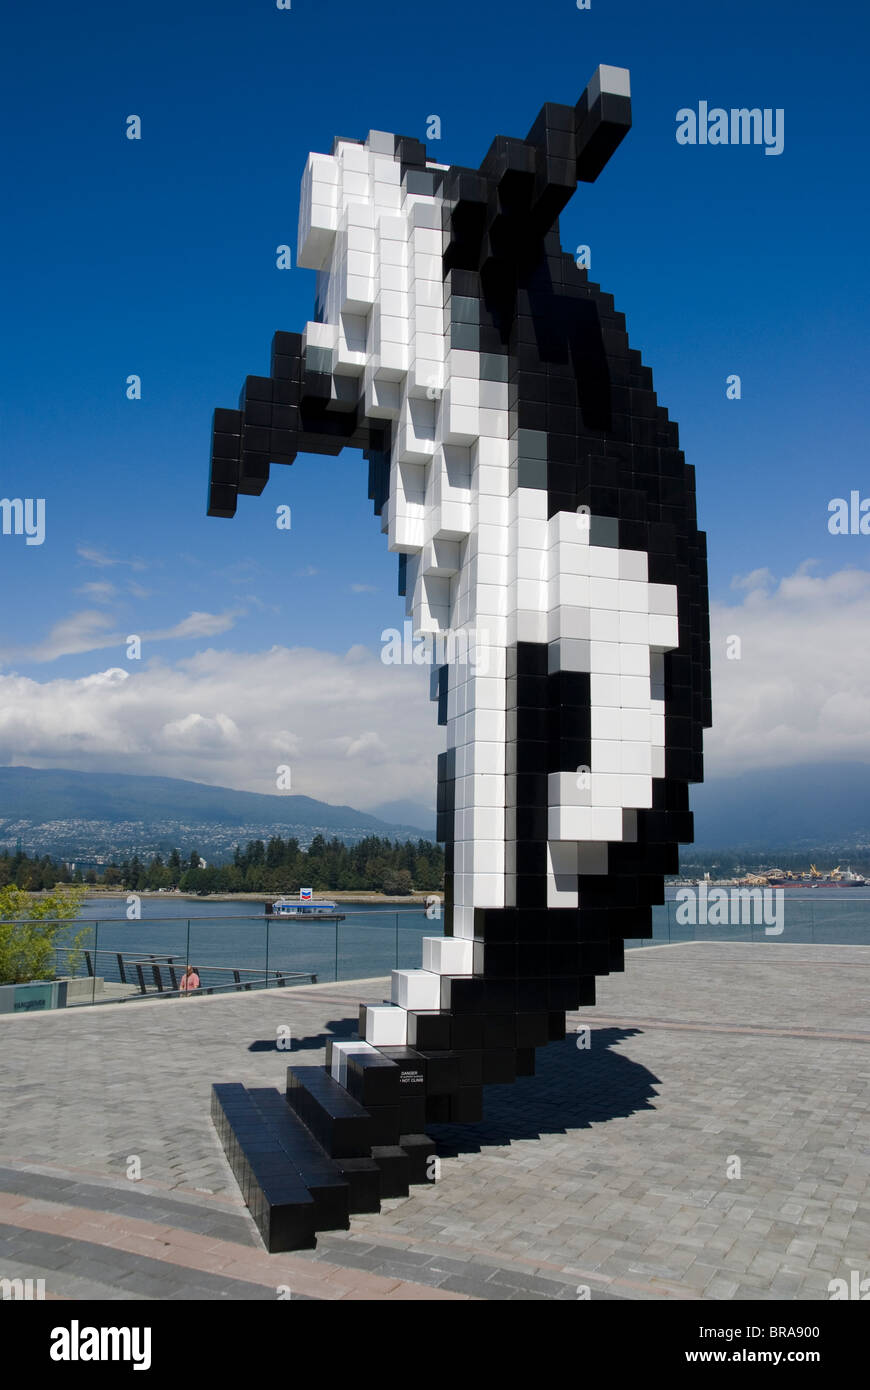 'Pixel Orca', sculpture by Douglas Coupland outside the Vancouver Convention Centre Stock Photo